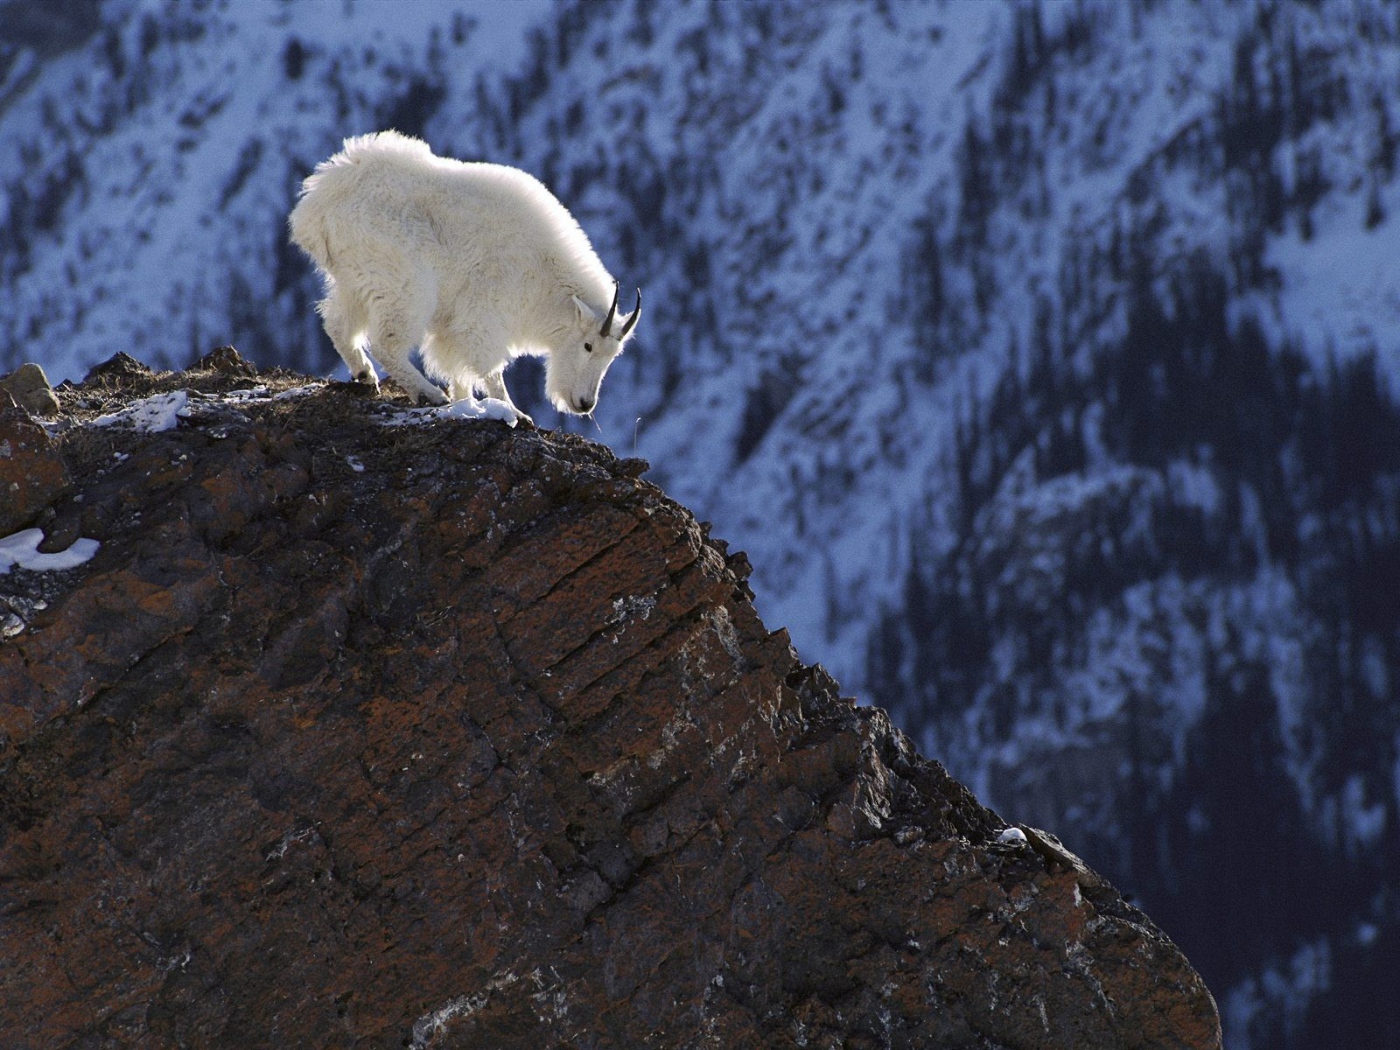 White goat in the mountains